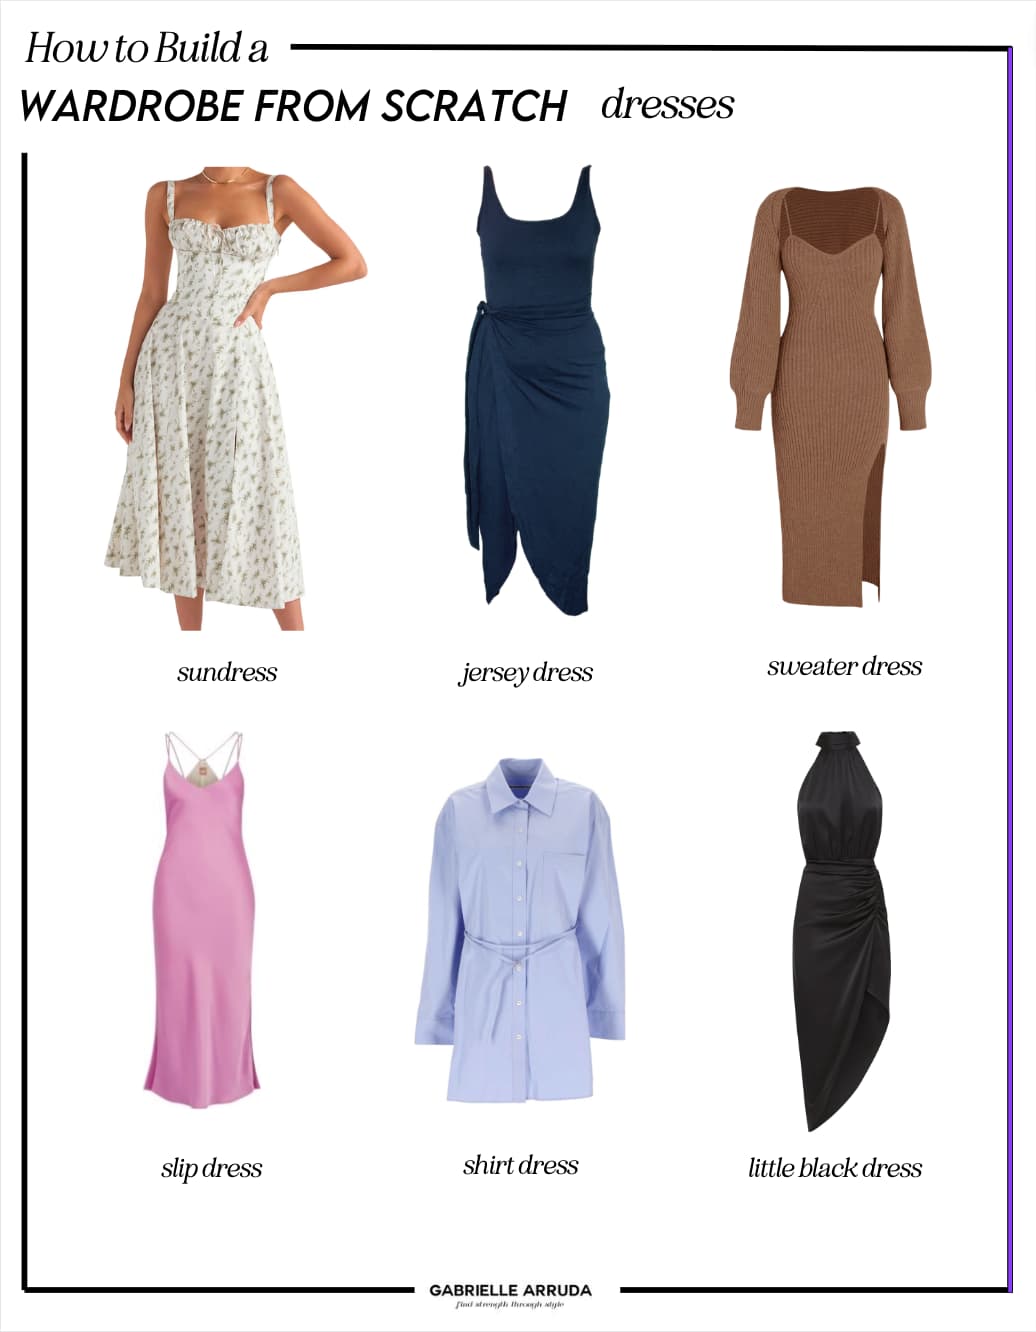 dress examples for building wardrobe from scratch